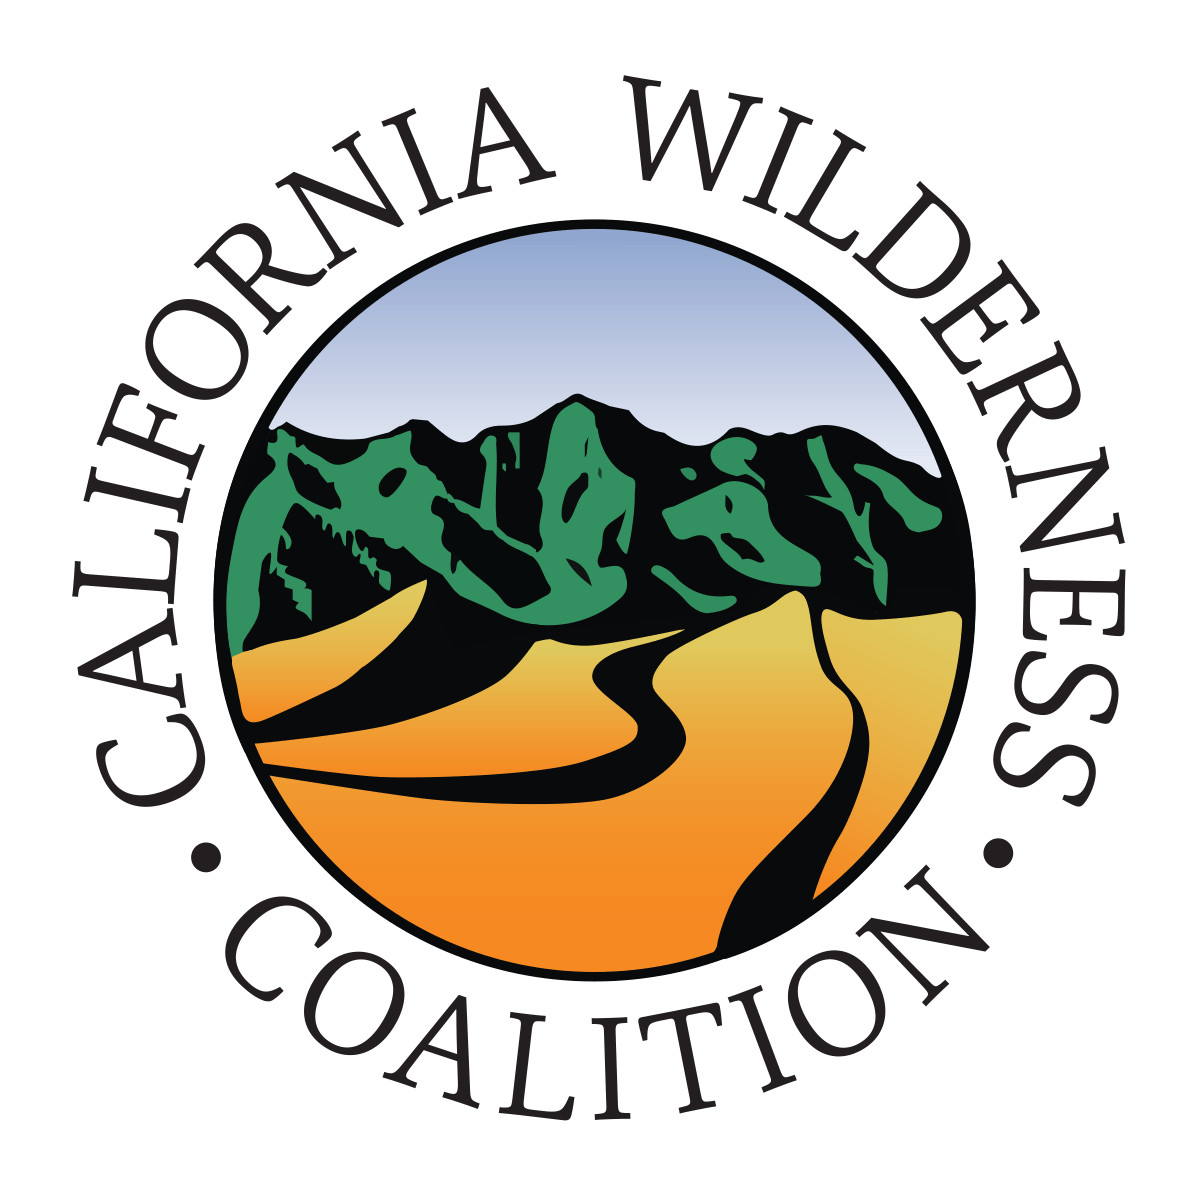 Wilderness Logo - California Wilderness Coalition – Preserving our wild spaces and rivers